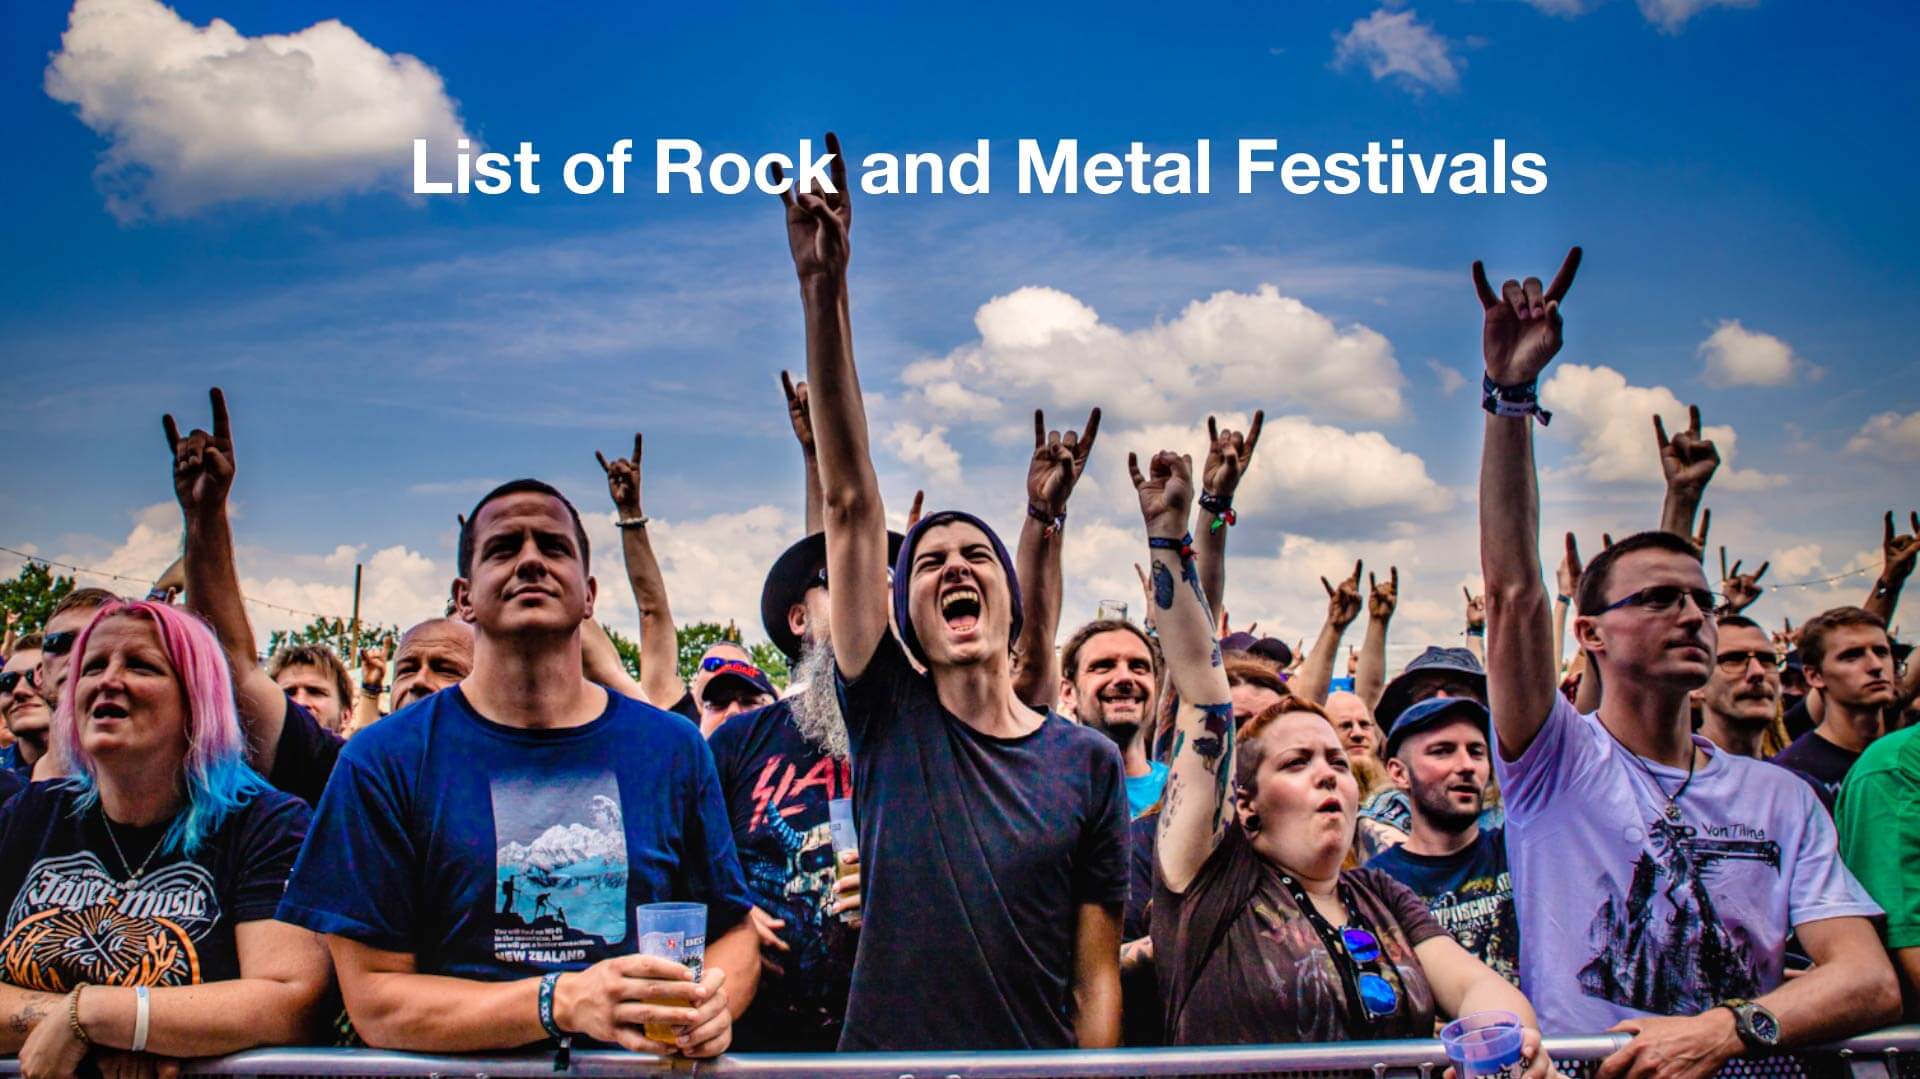 List of heavy metal and rock festivals